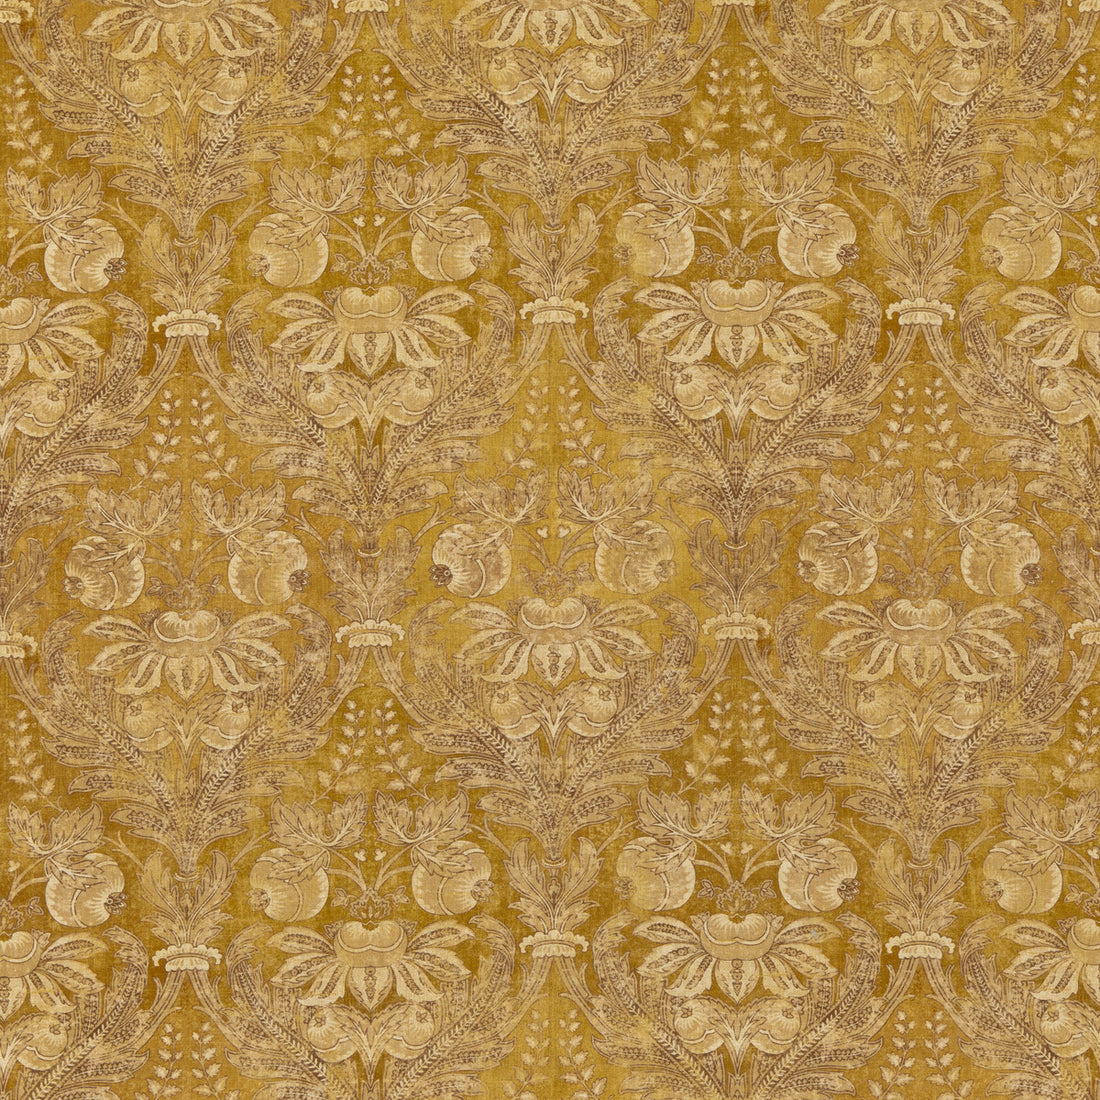 Lapura Damask fabric in ochre color - pattern BP10828.2.0 - by G P &amp; J Baker in the Coromandel collection